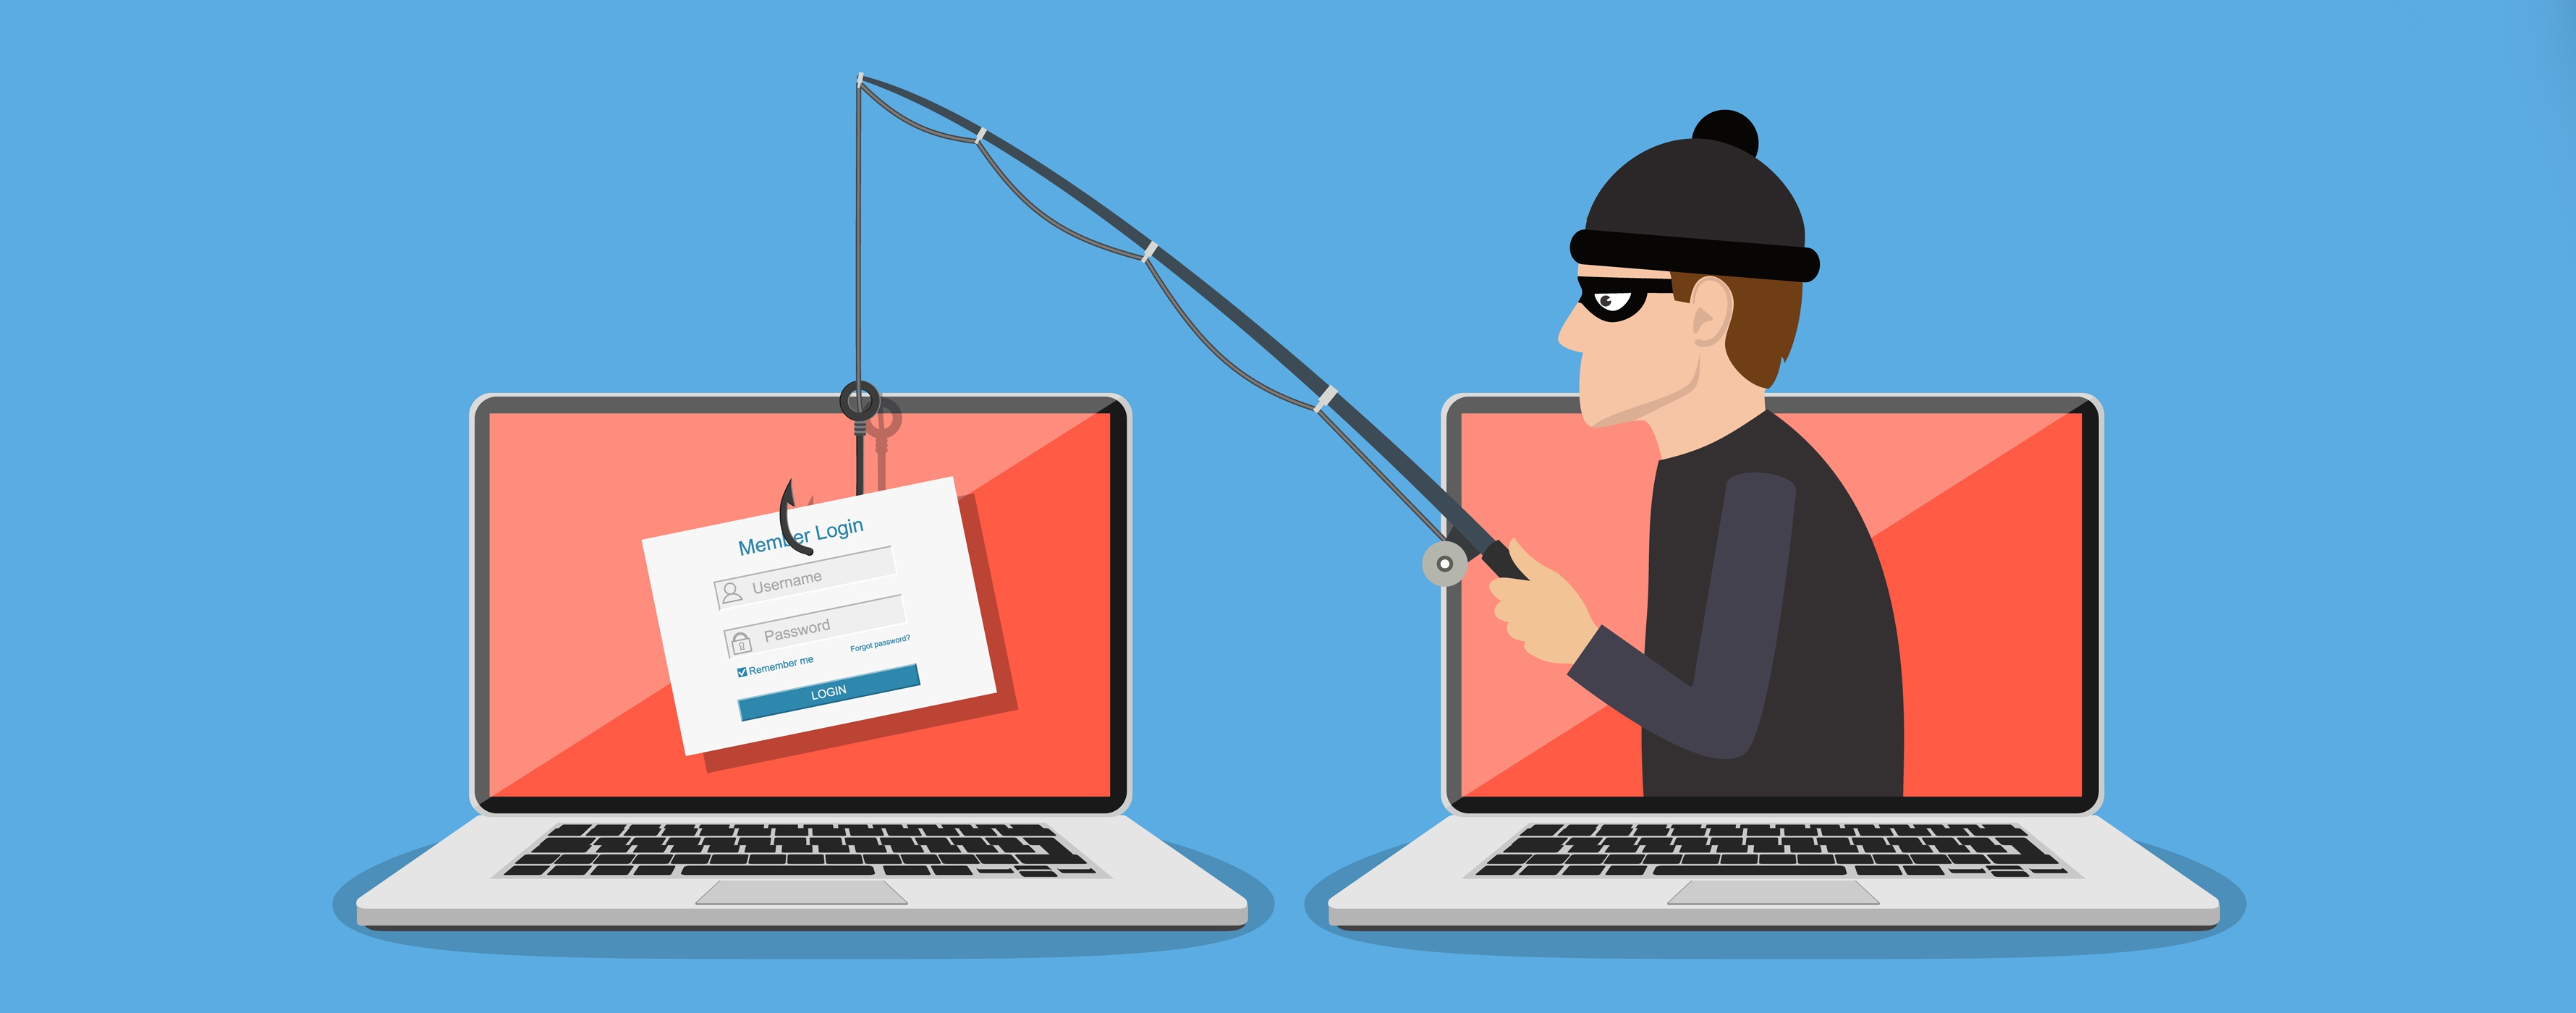 Hook, Line, and Sinker: How to Avoid Phishing and Smishing Scams